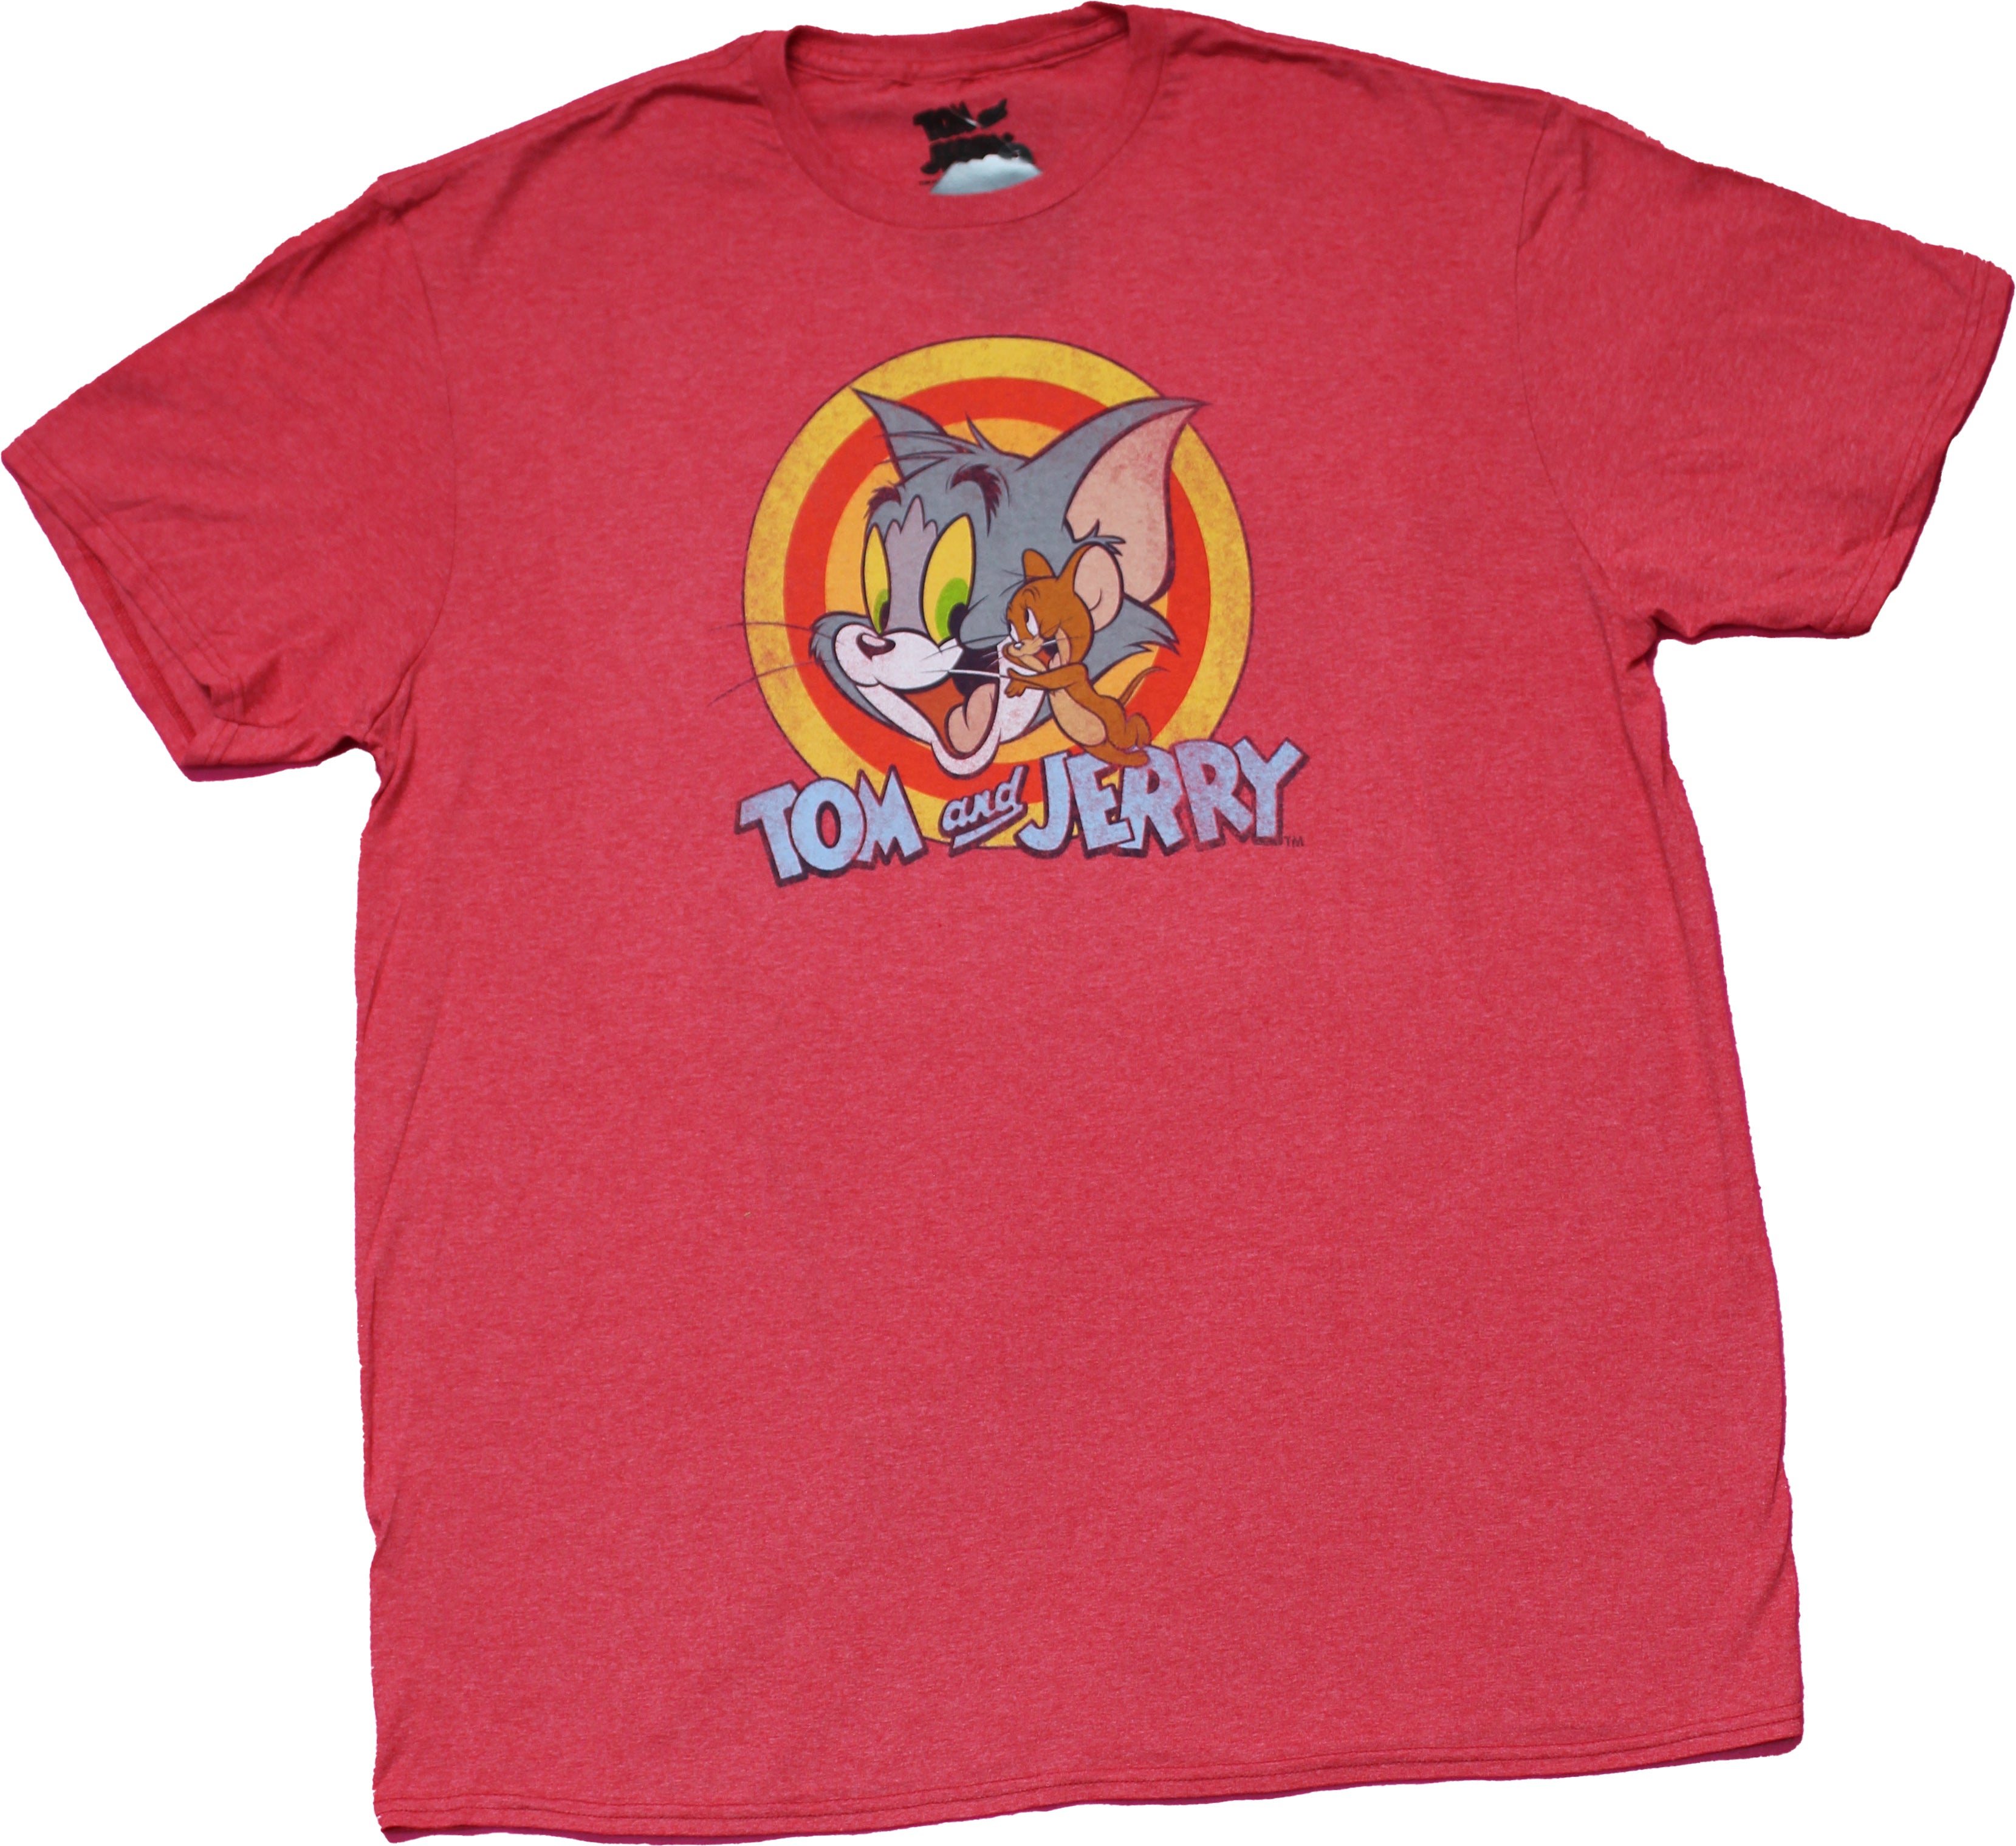 Tom and Jerry Mens T-Shirt - Duo in Target Image